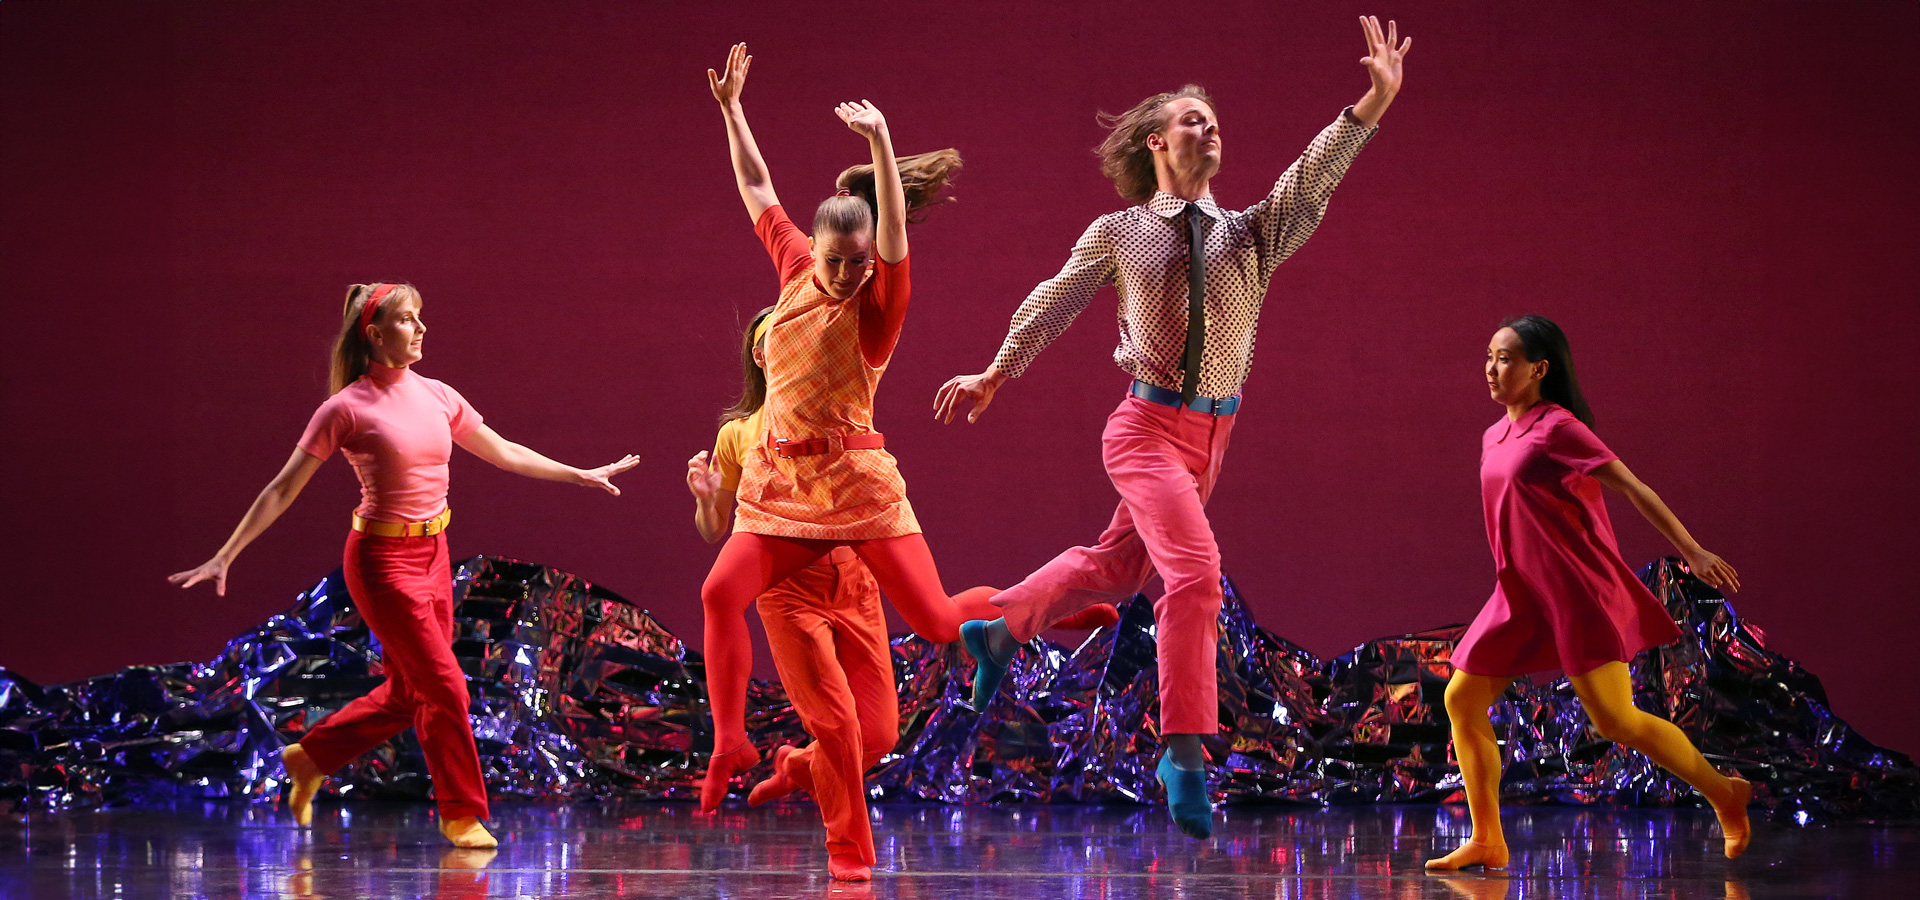 The Mark Morris Dance Group members perform Pepperland in bright red and orange costumes.